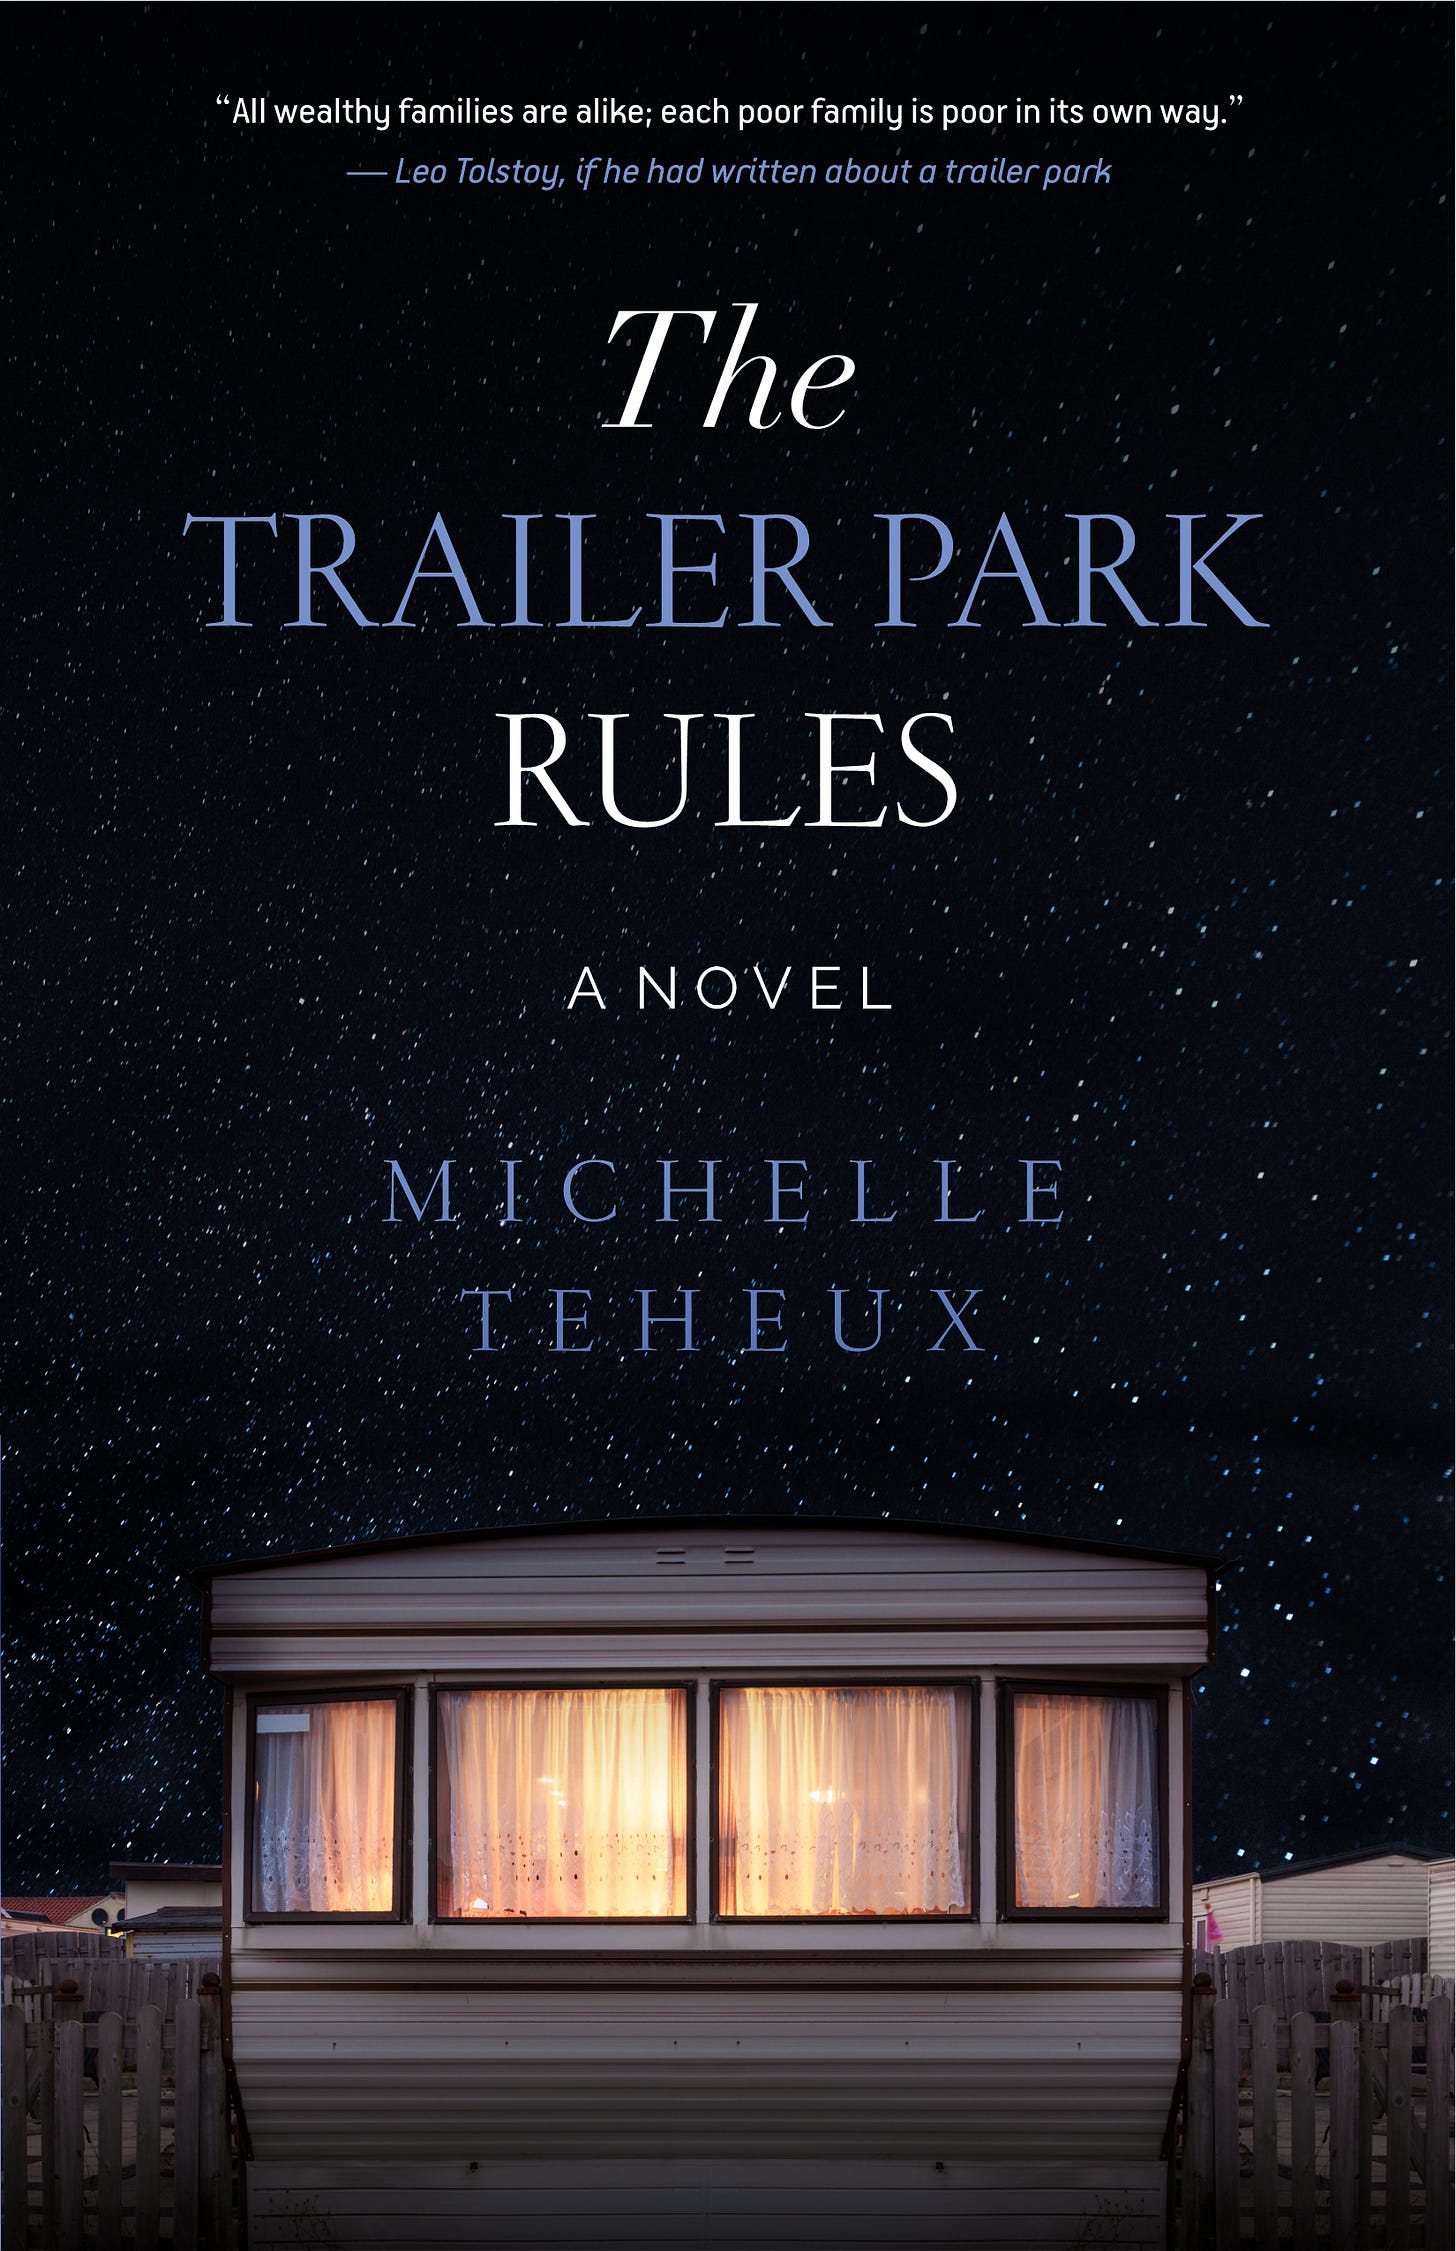 The Trailer Park Rules book cover